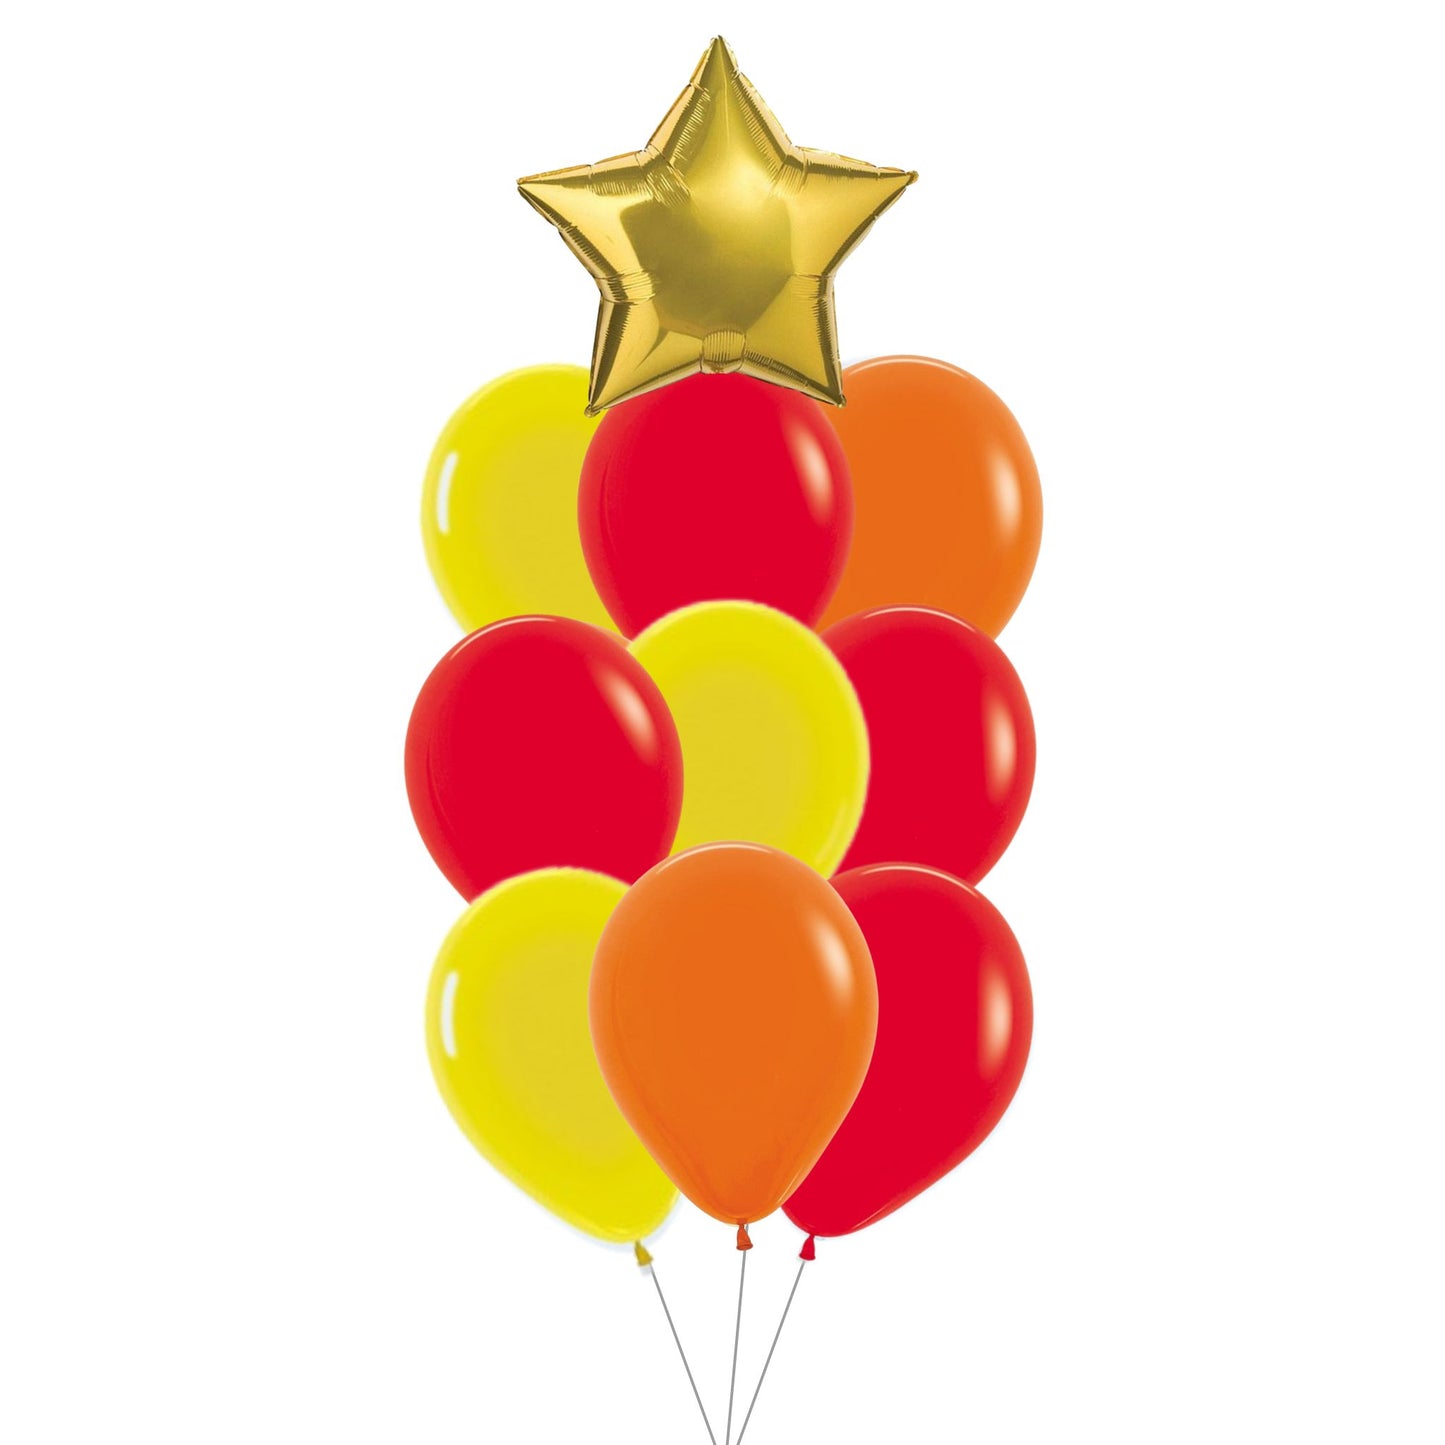 Classic new year star helium balloon bouquet